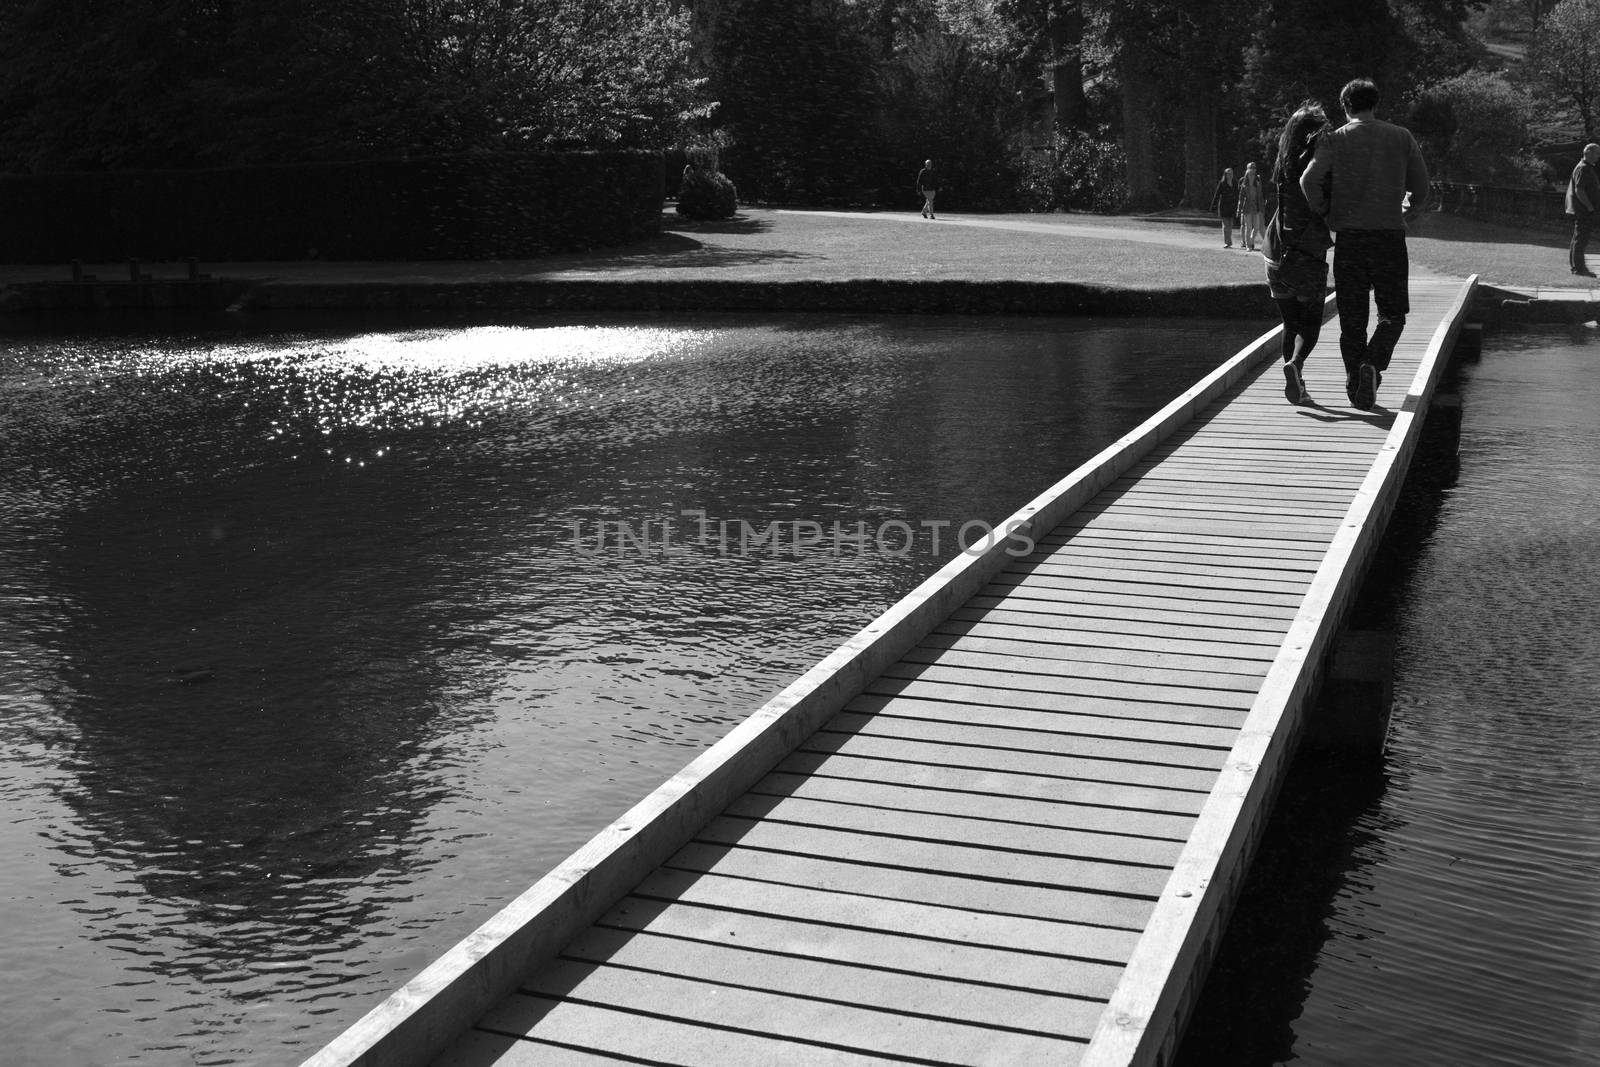 A Couple on a Bridge by samULvisuals